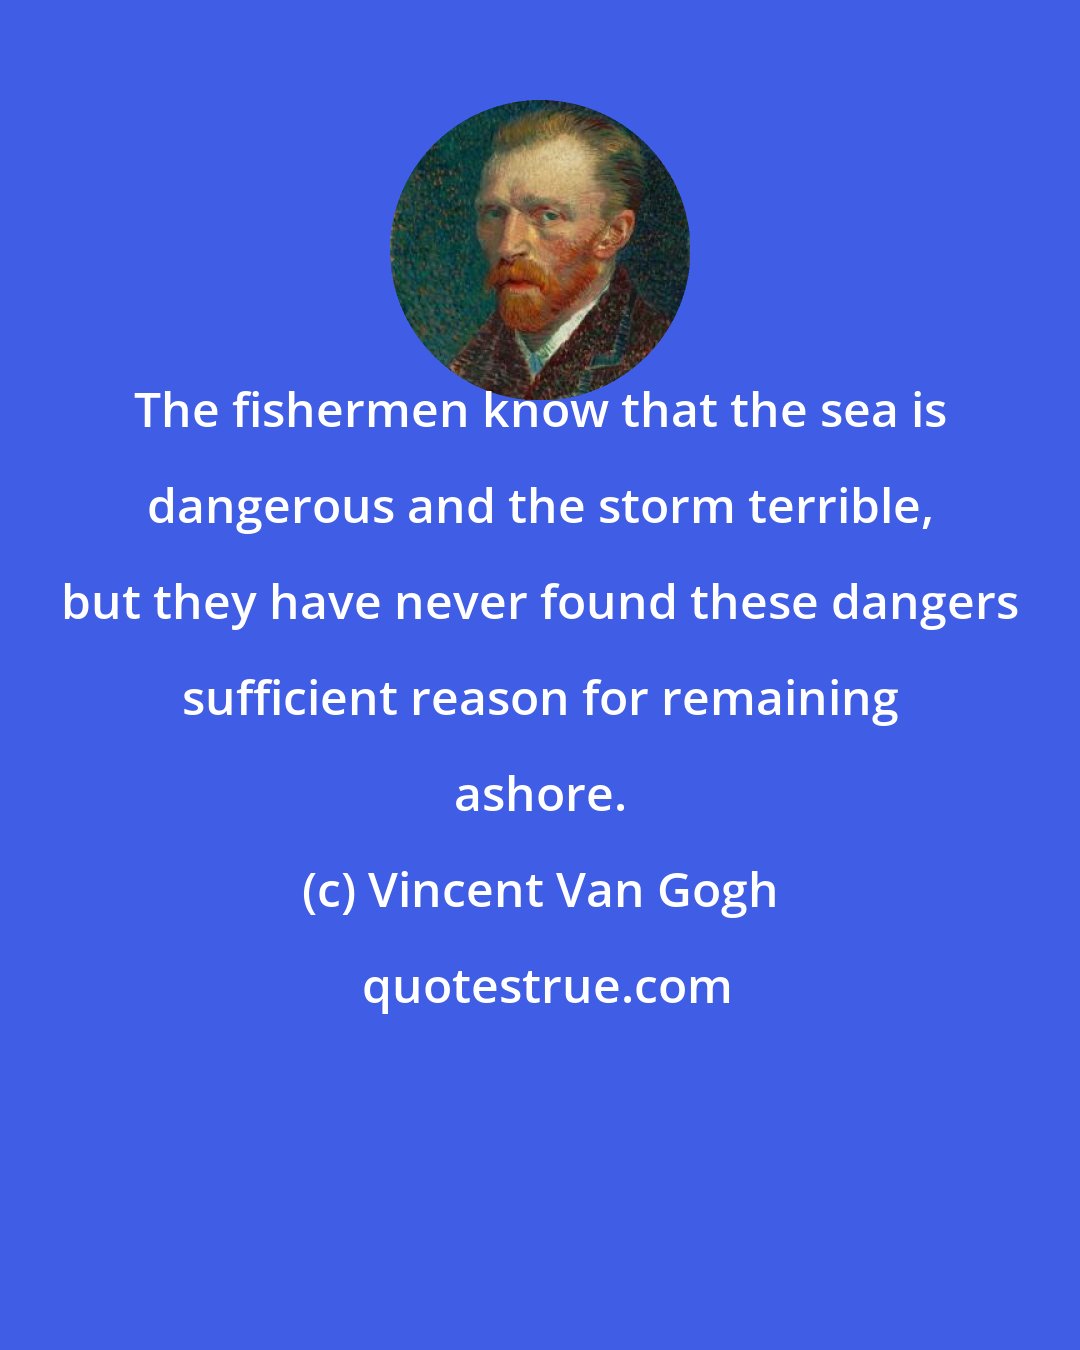 Vincent Van Gogh: The fishermen know that the sea is dangerous and the storm terrible, but they have never found these dangers sufficient reason for remaining ashore.